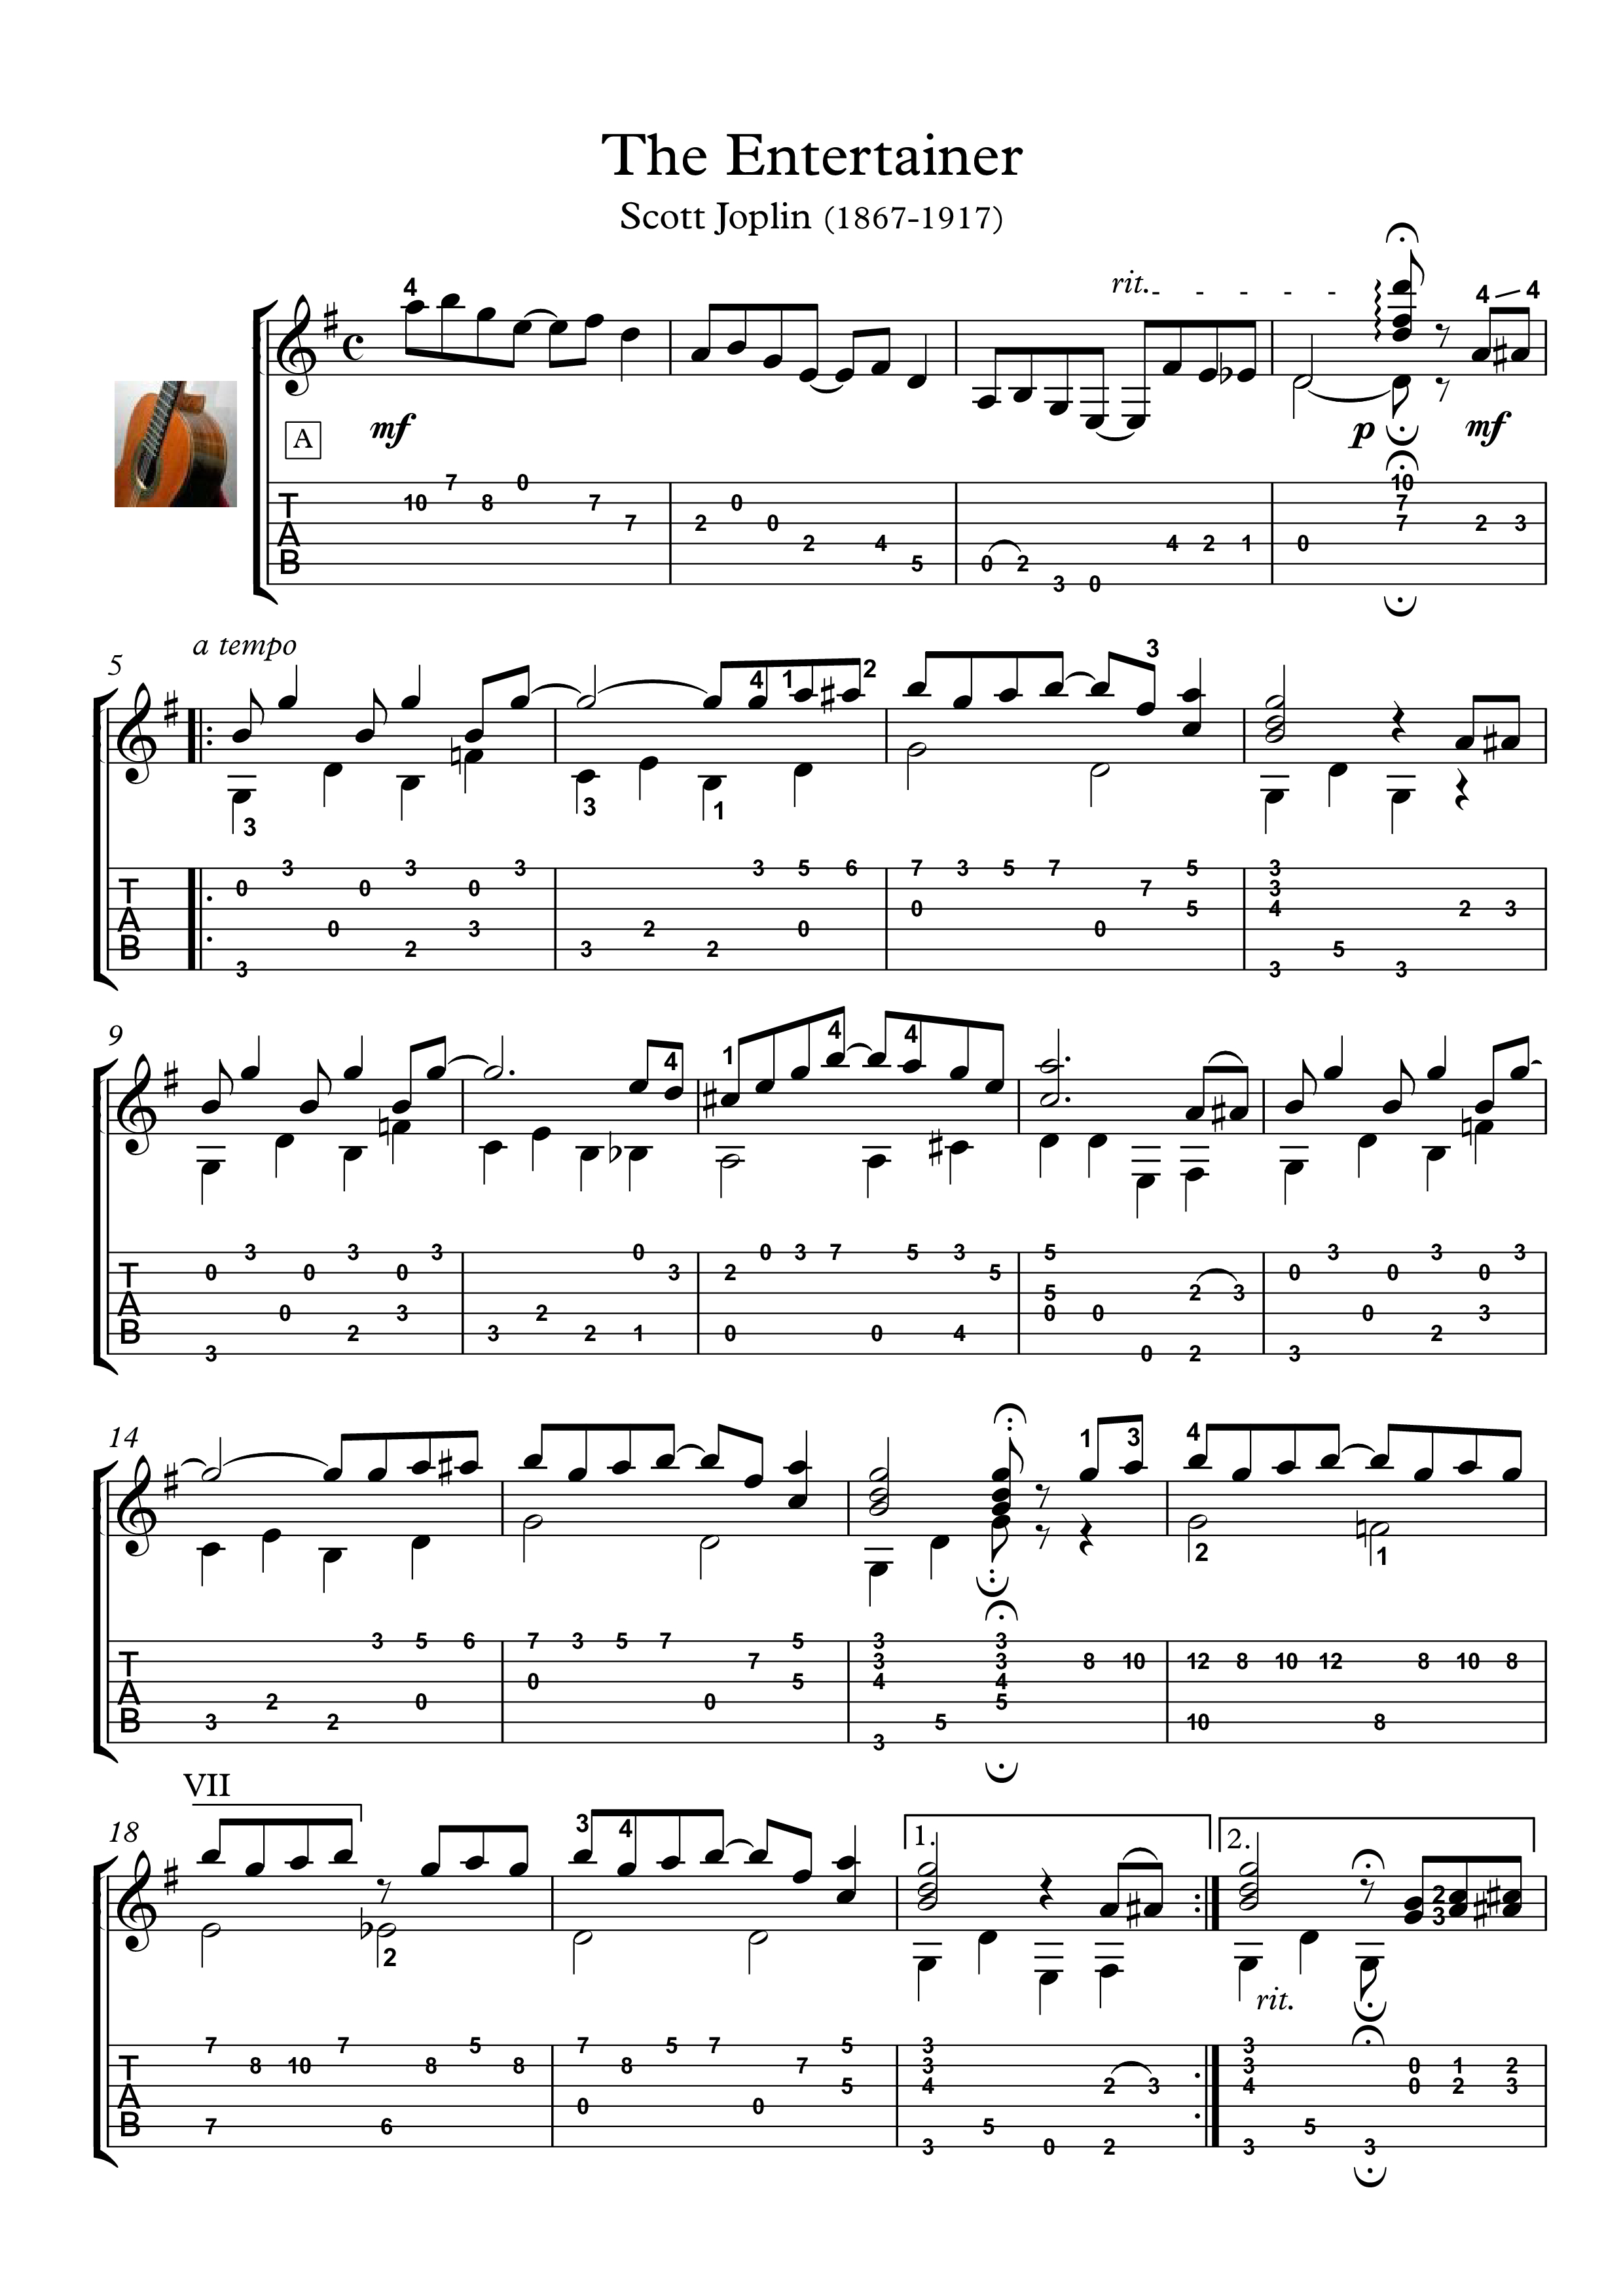 The Entertainer&quot; Is A 1902 Classic Rag Writtenscott Joplin. Here - Free Printable Sheet Music For The Entertainer